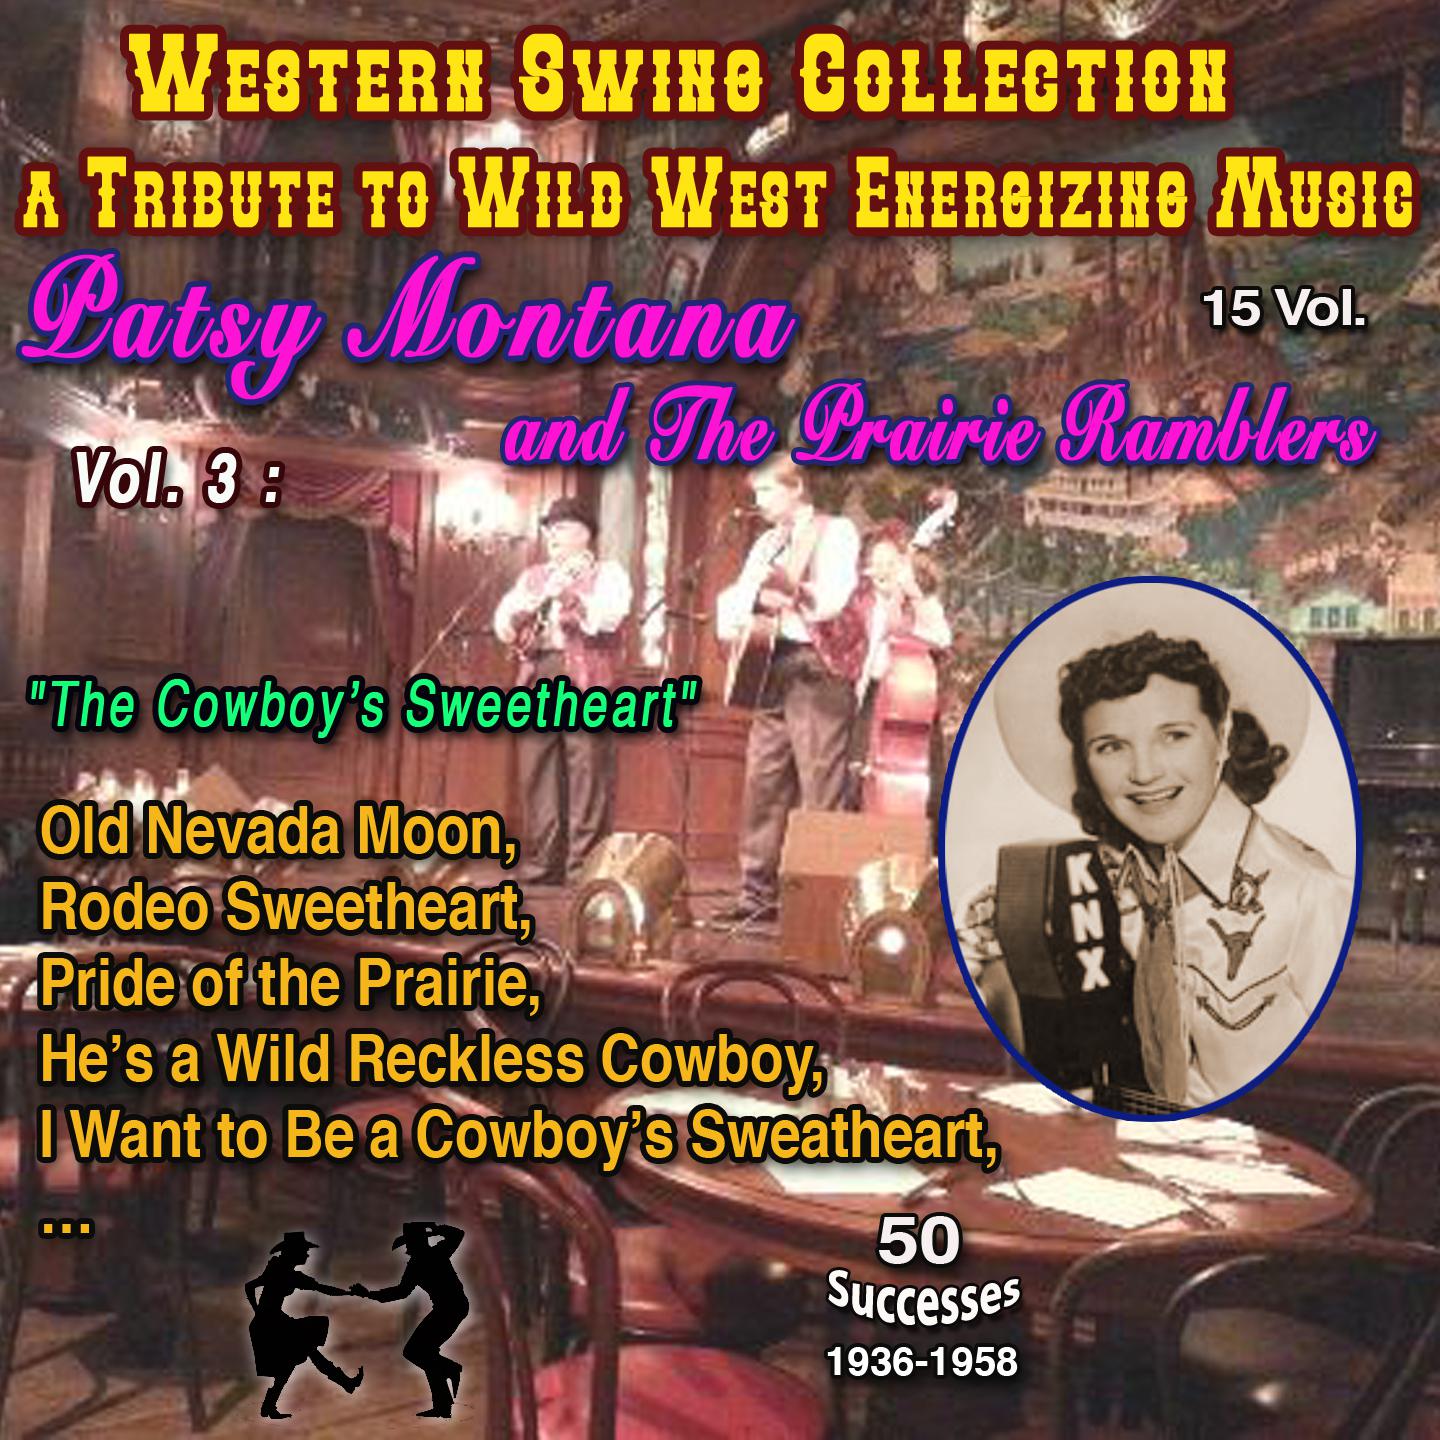 Постер альбома Western Swing Collection : a Tribute to Wild West Energizing Music : 15 Vol. Vol. 3 : Patsy Montana and The Prairie Ramblers "The Cowboy's Sweetheart"